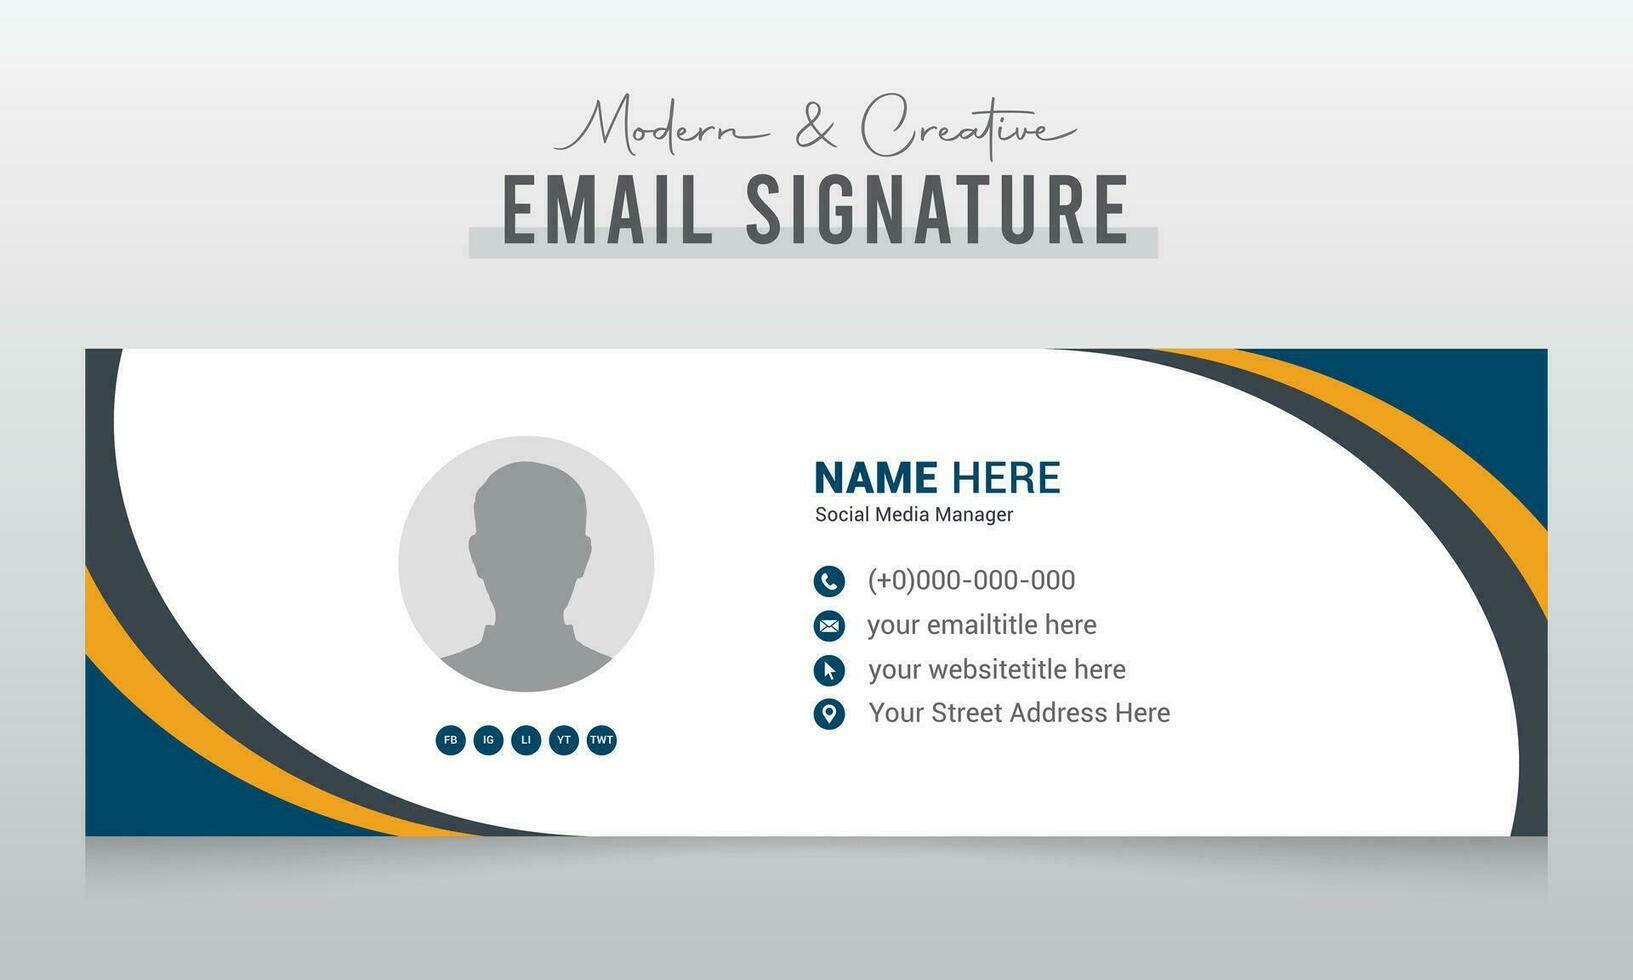 Corporate Modern and Creative Email Signature Design Template vector